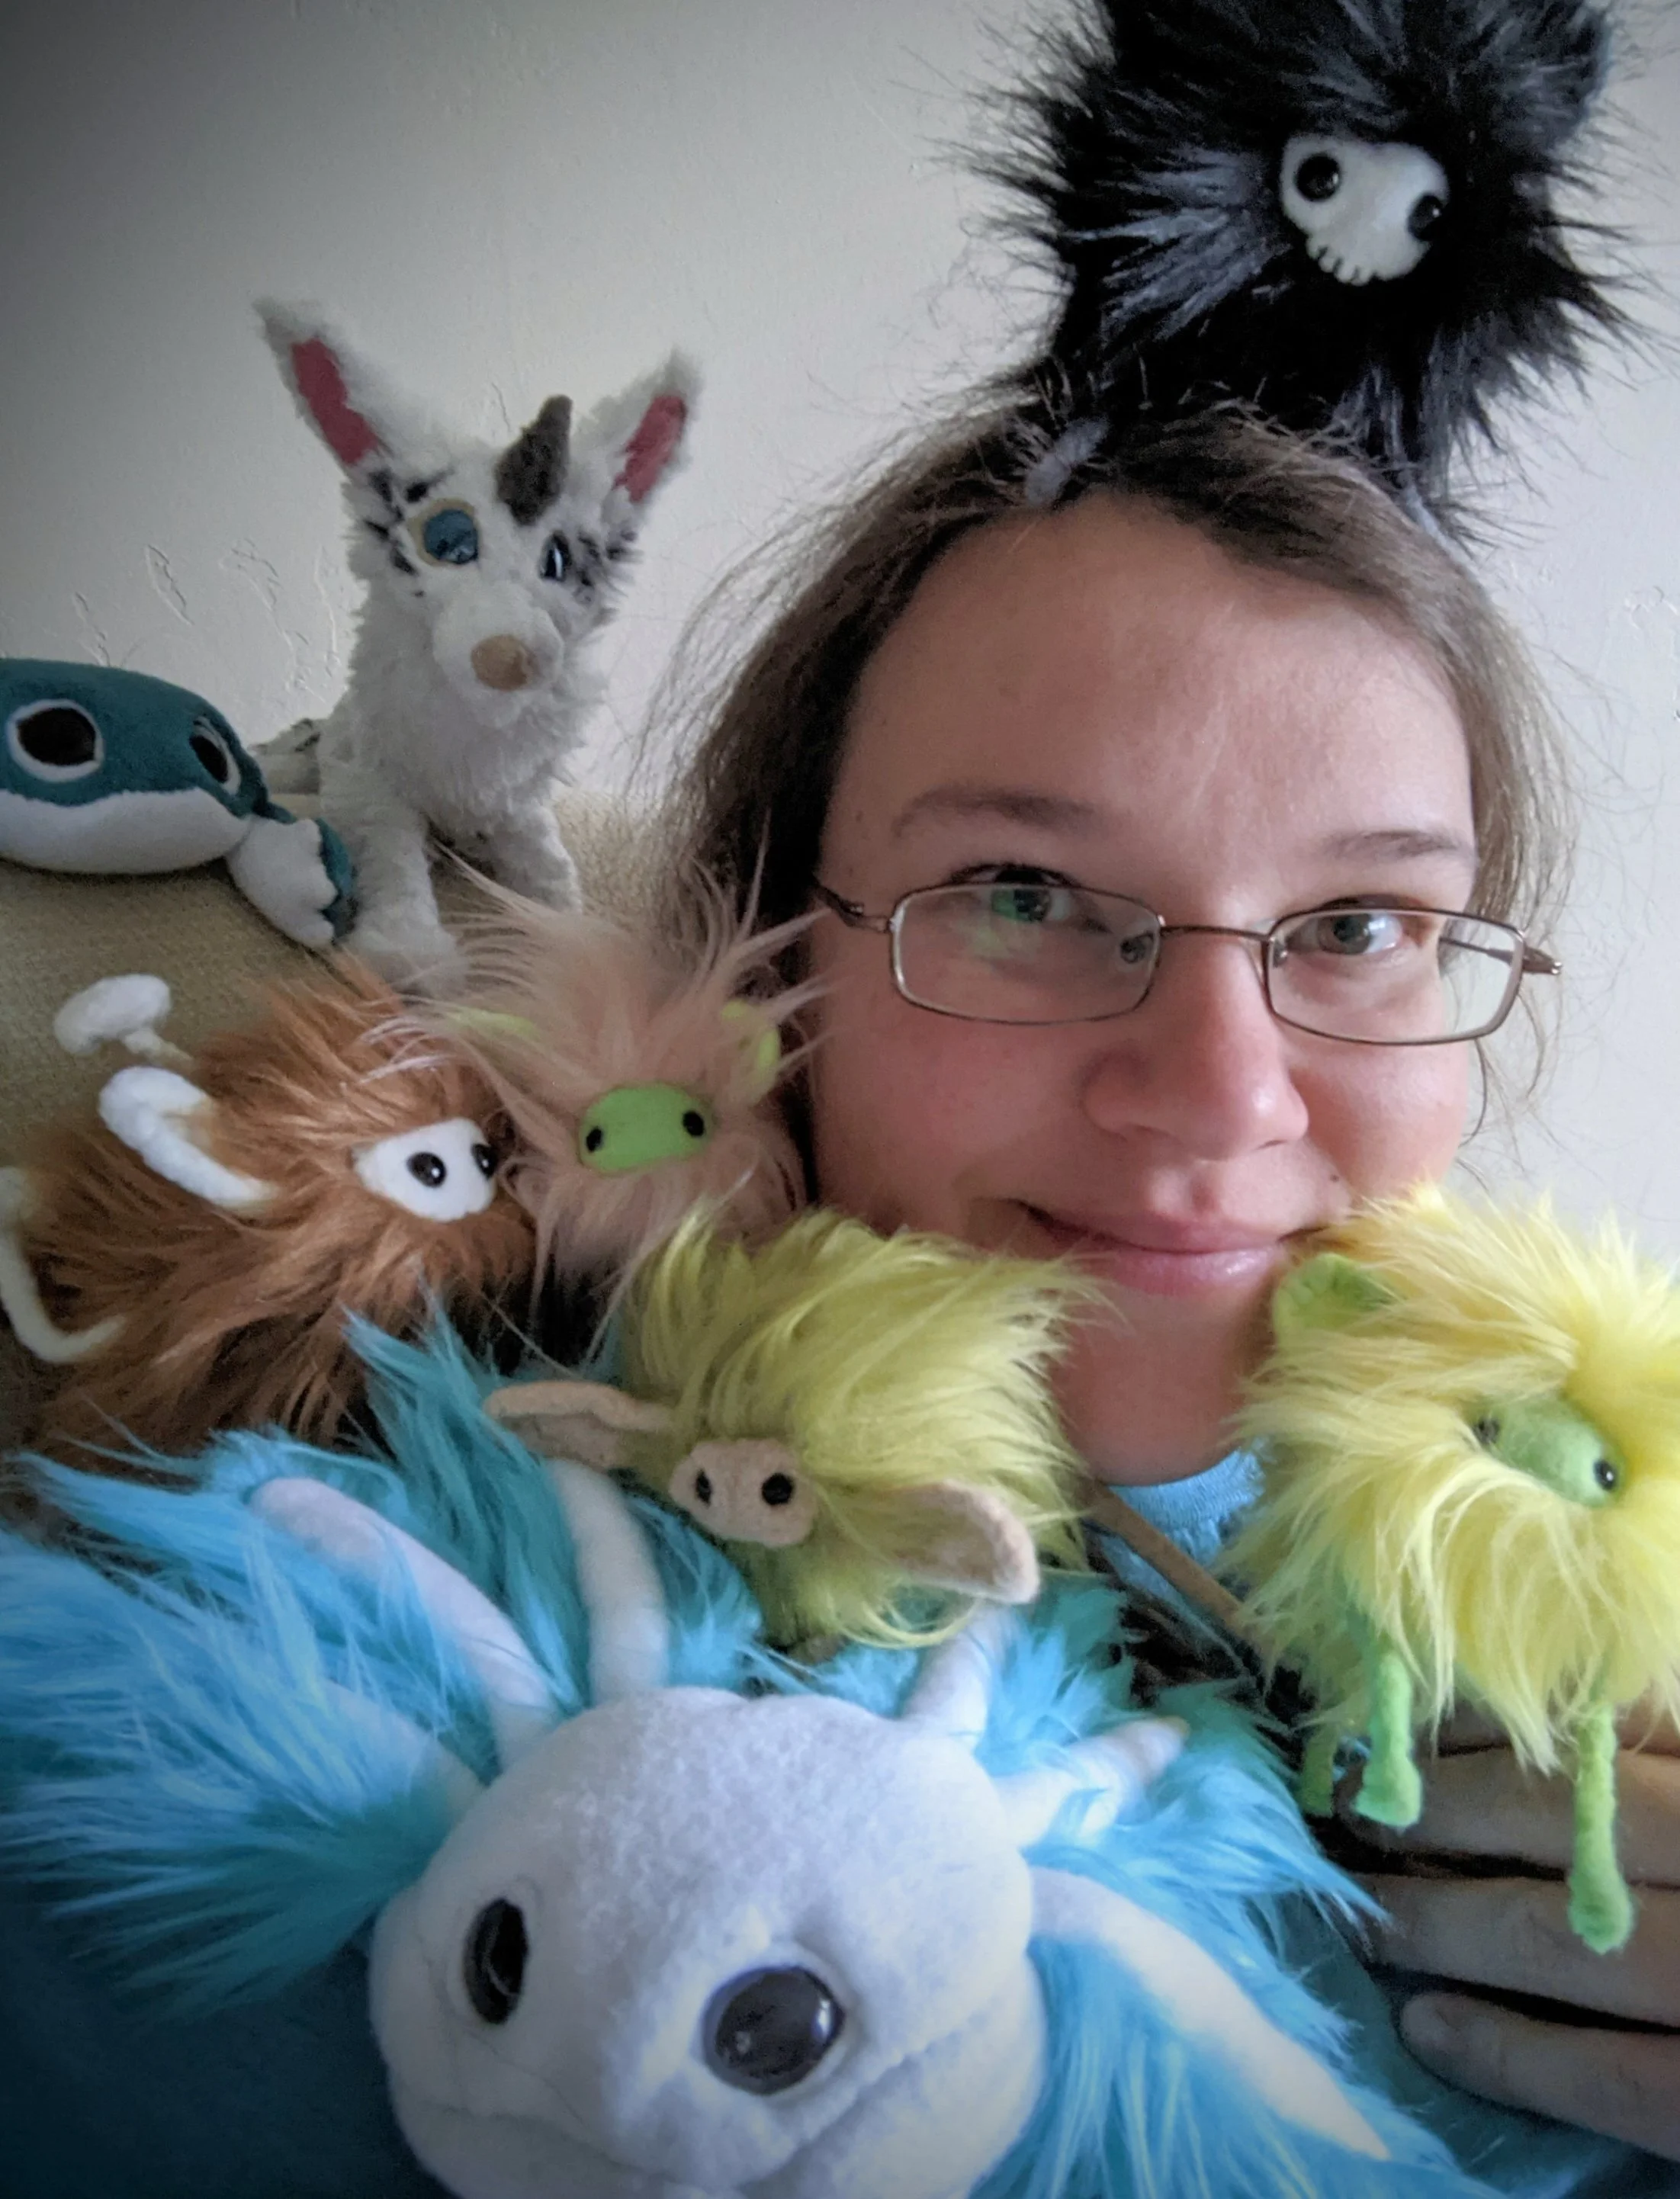 The artist smiles, surrounded by some of her plush creations.